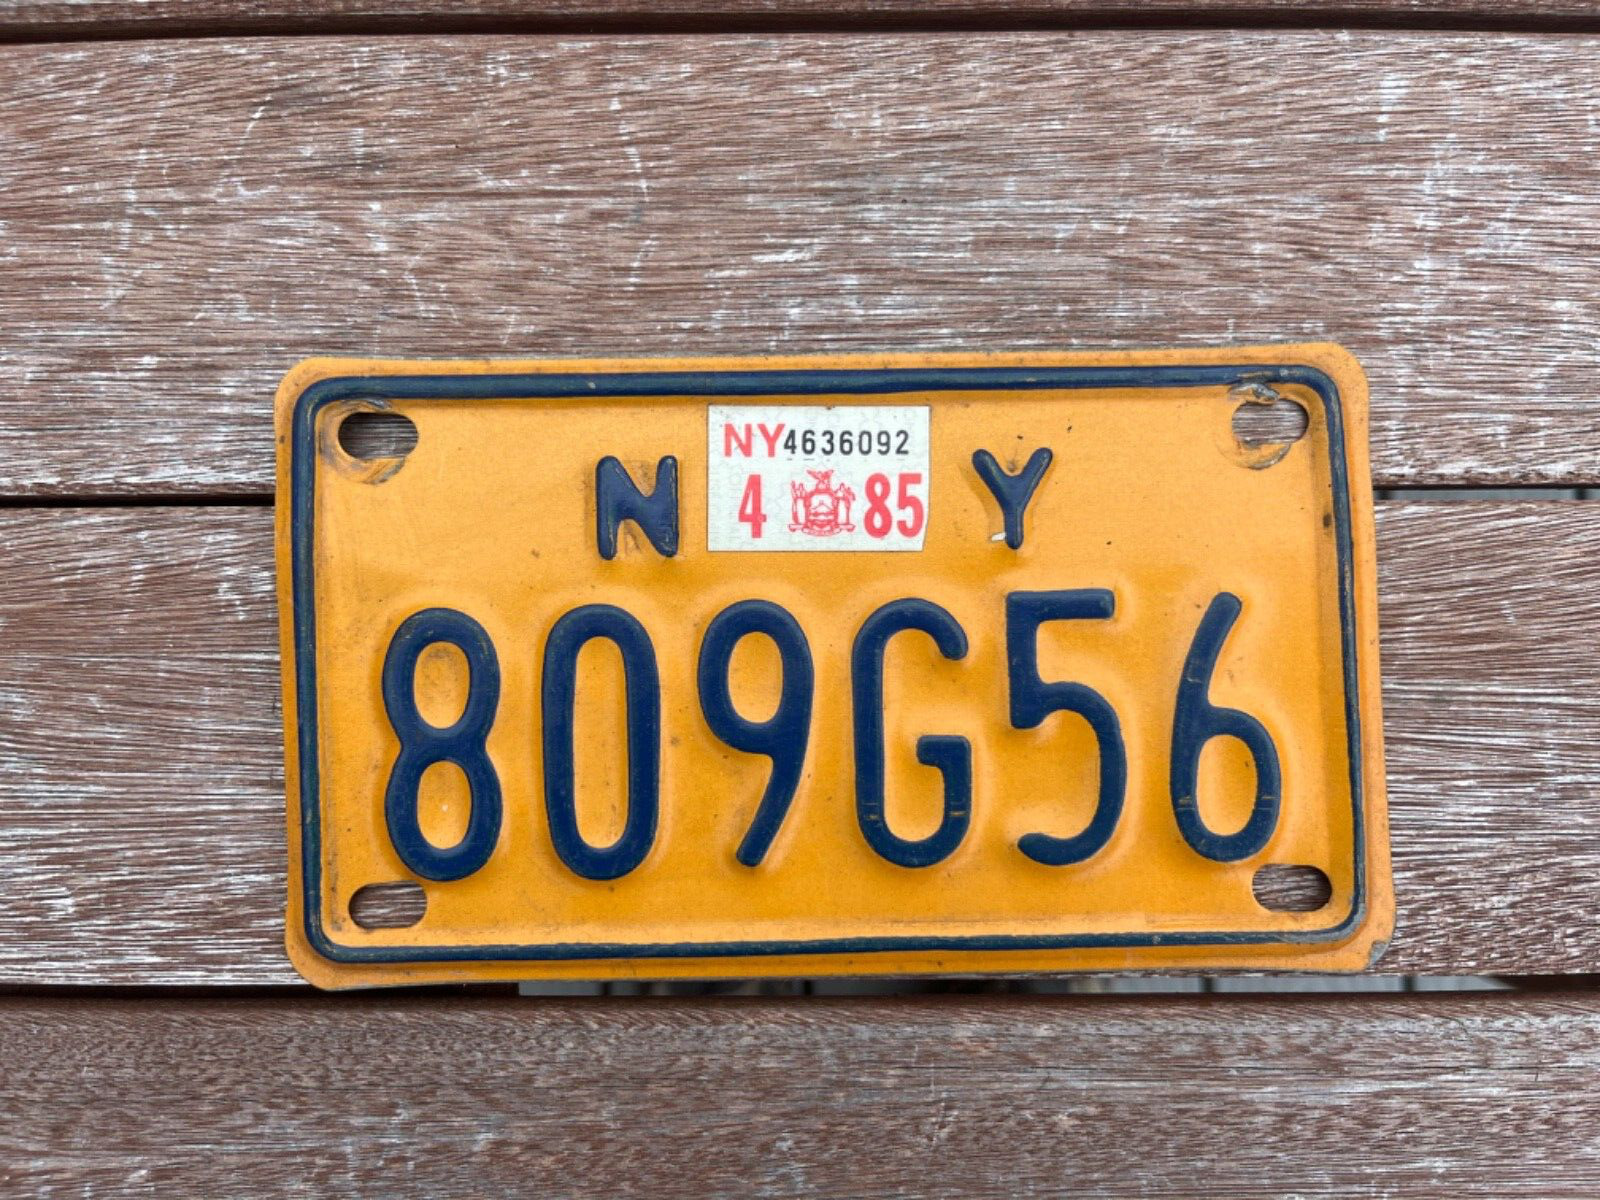 1985 New York Motorcycle License Plate 809G56